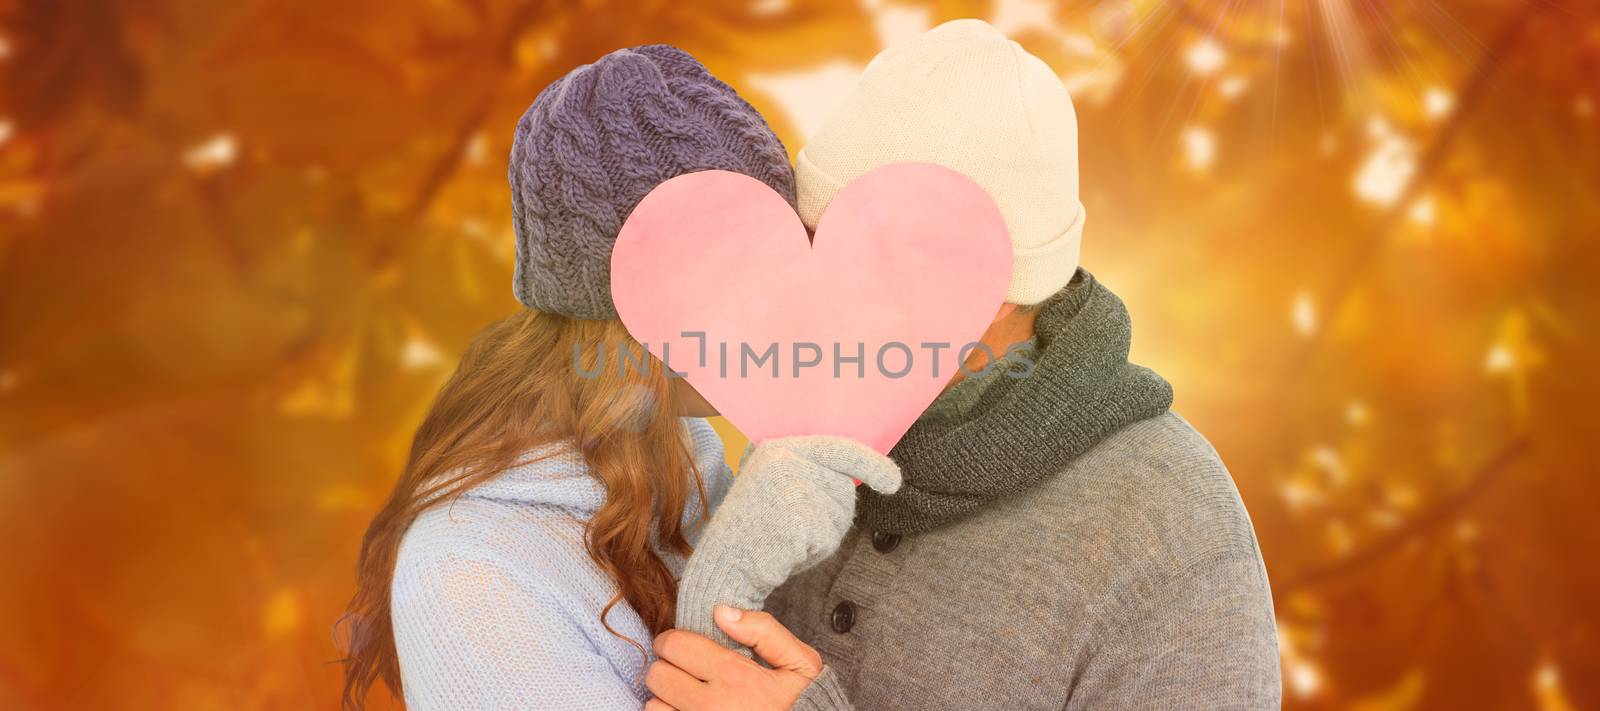 Composite image of couple in warm clothing holding heart by Wavebreakmedia